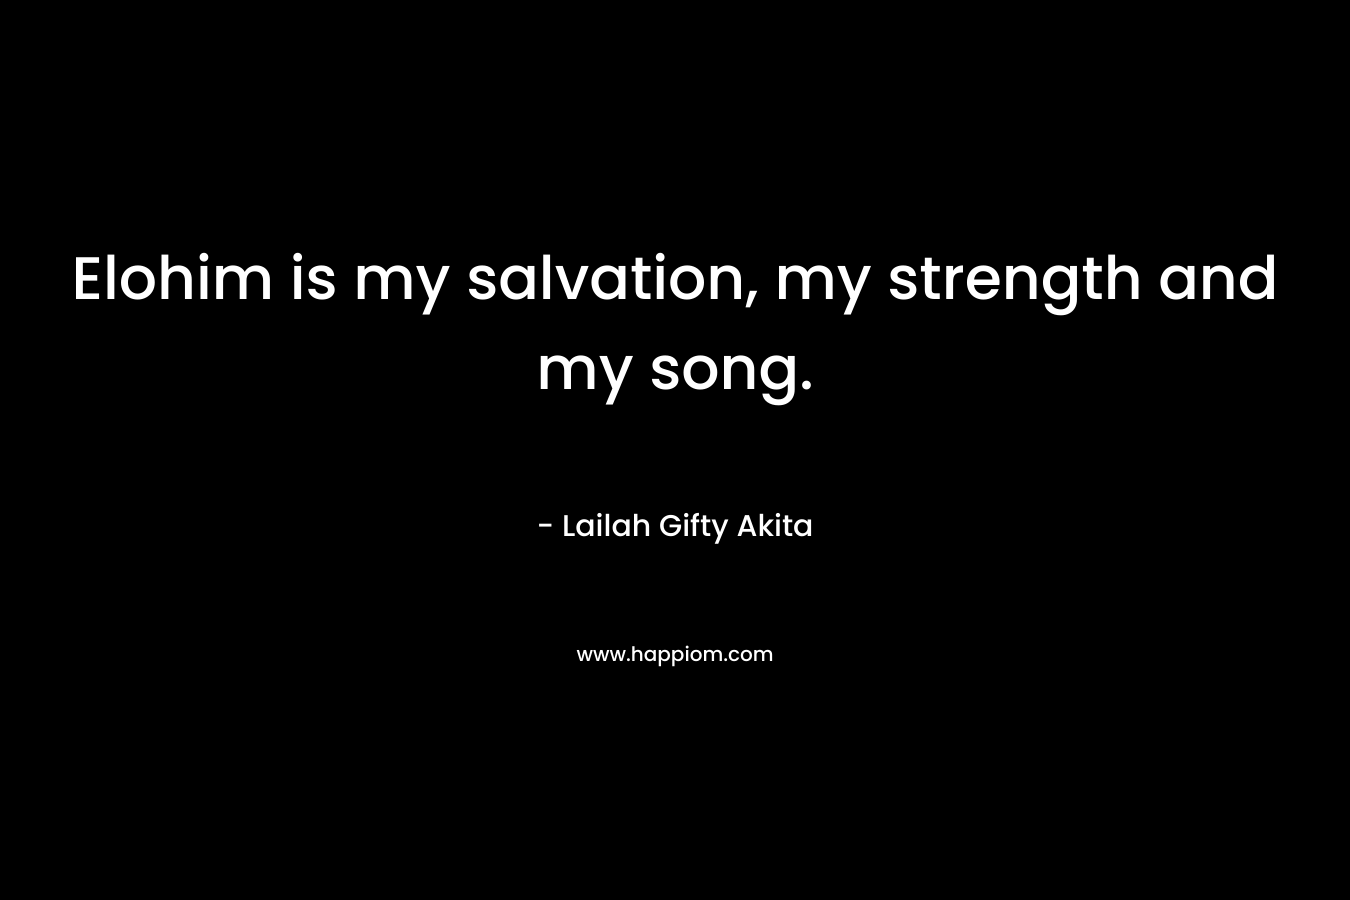 Elohim is my salvation, my strength and my song. – Lailah Gifty Akita